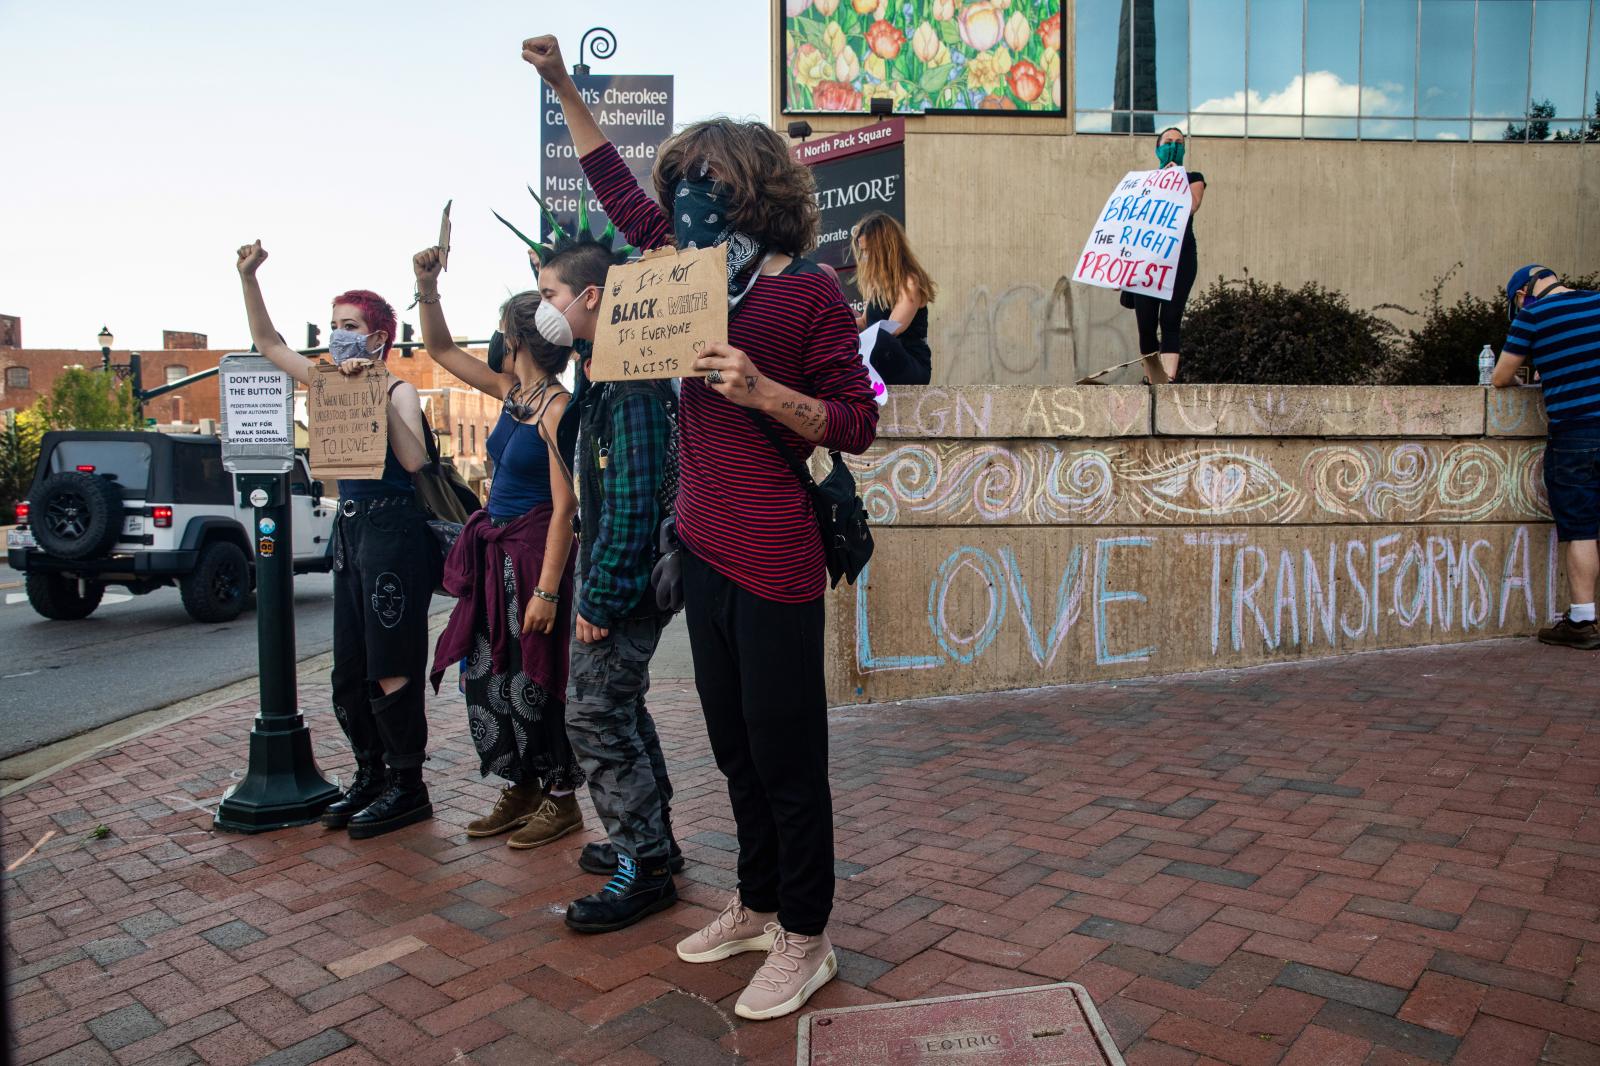 Image from Street - Asheville, NC Downtown race protests June 2020